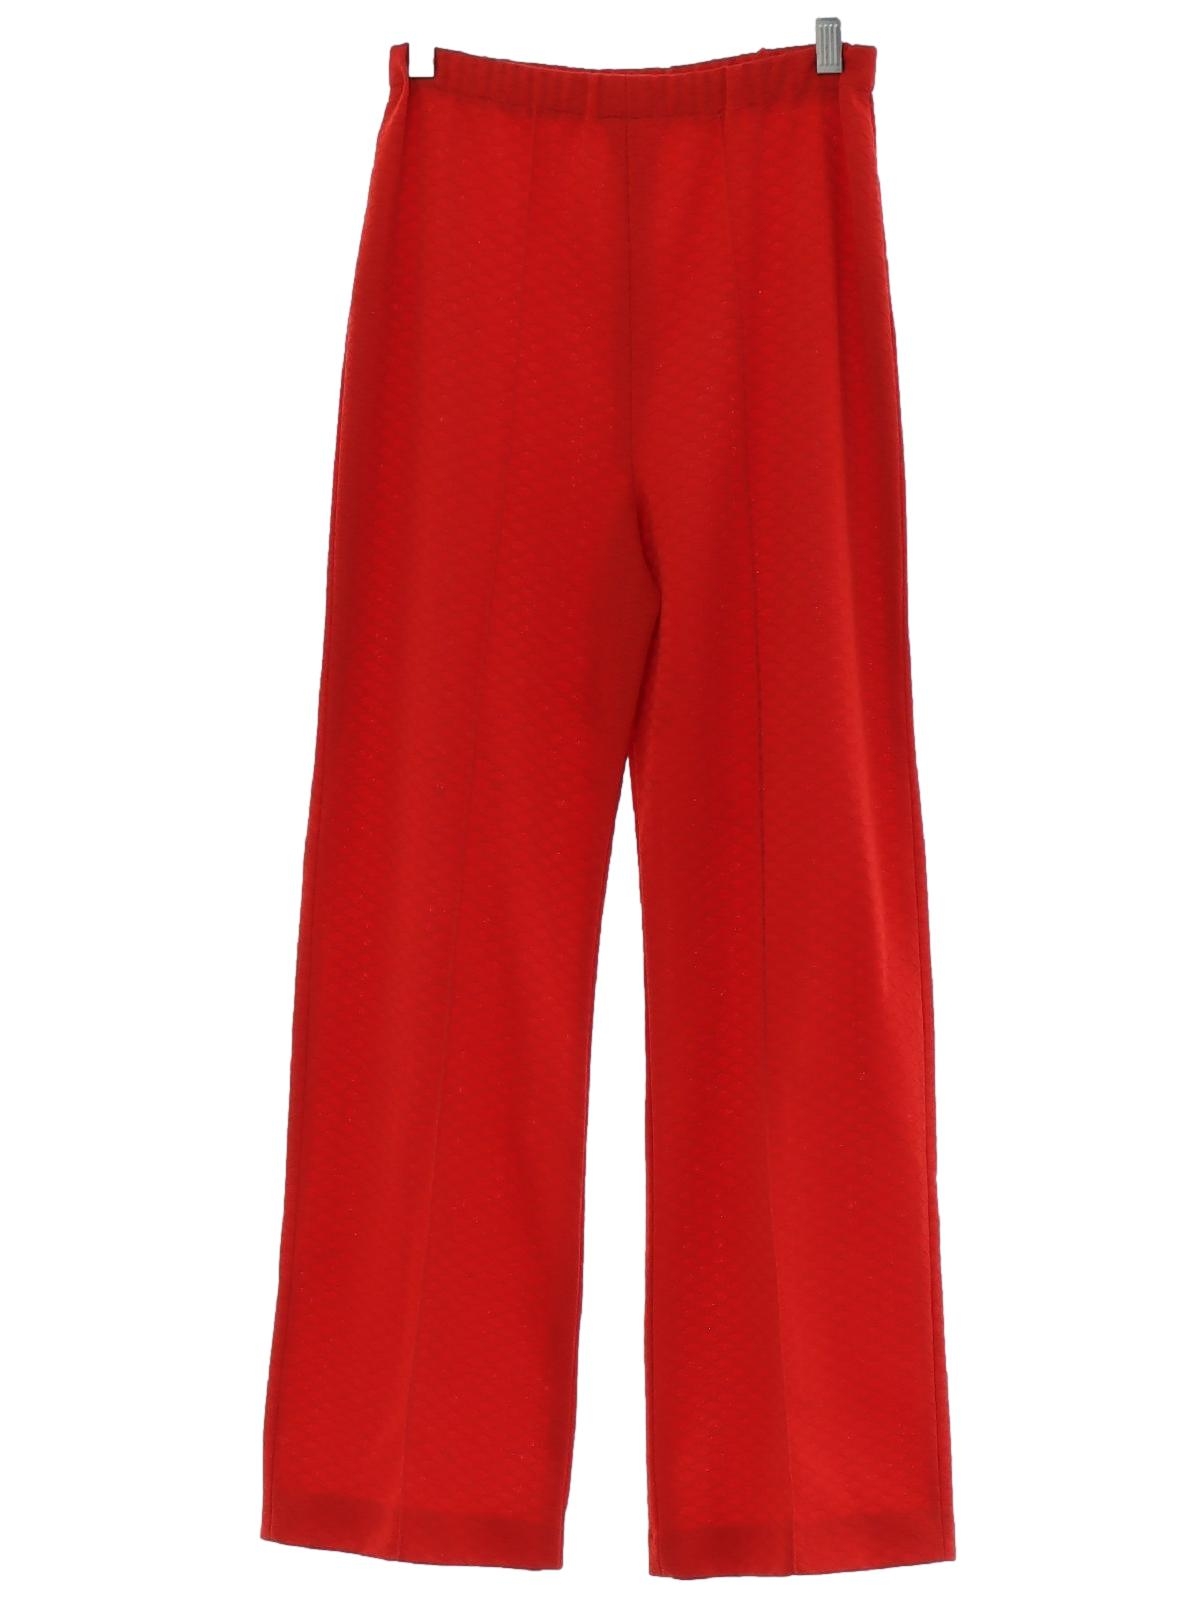 1970's Flared Pants / Flares: 70s -No Label- Womens red solid colored ...